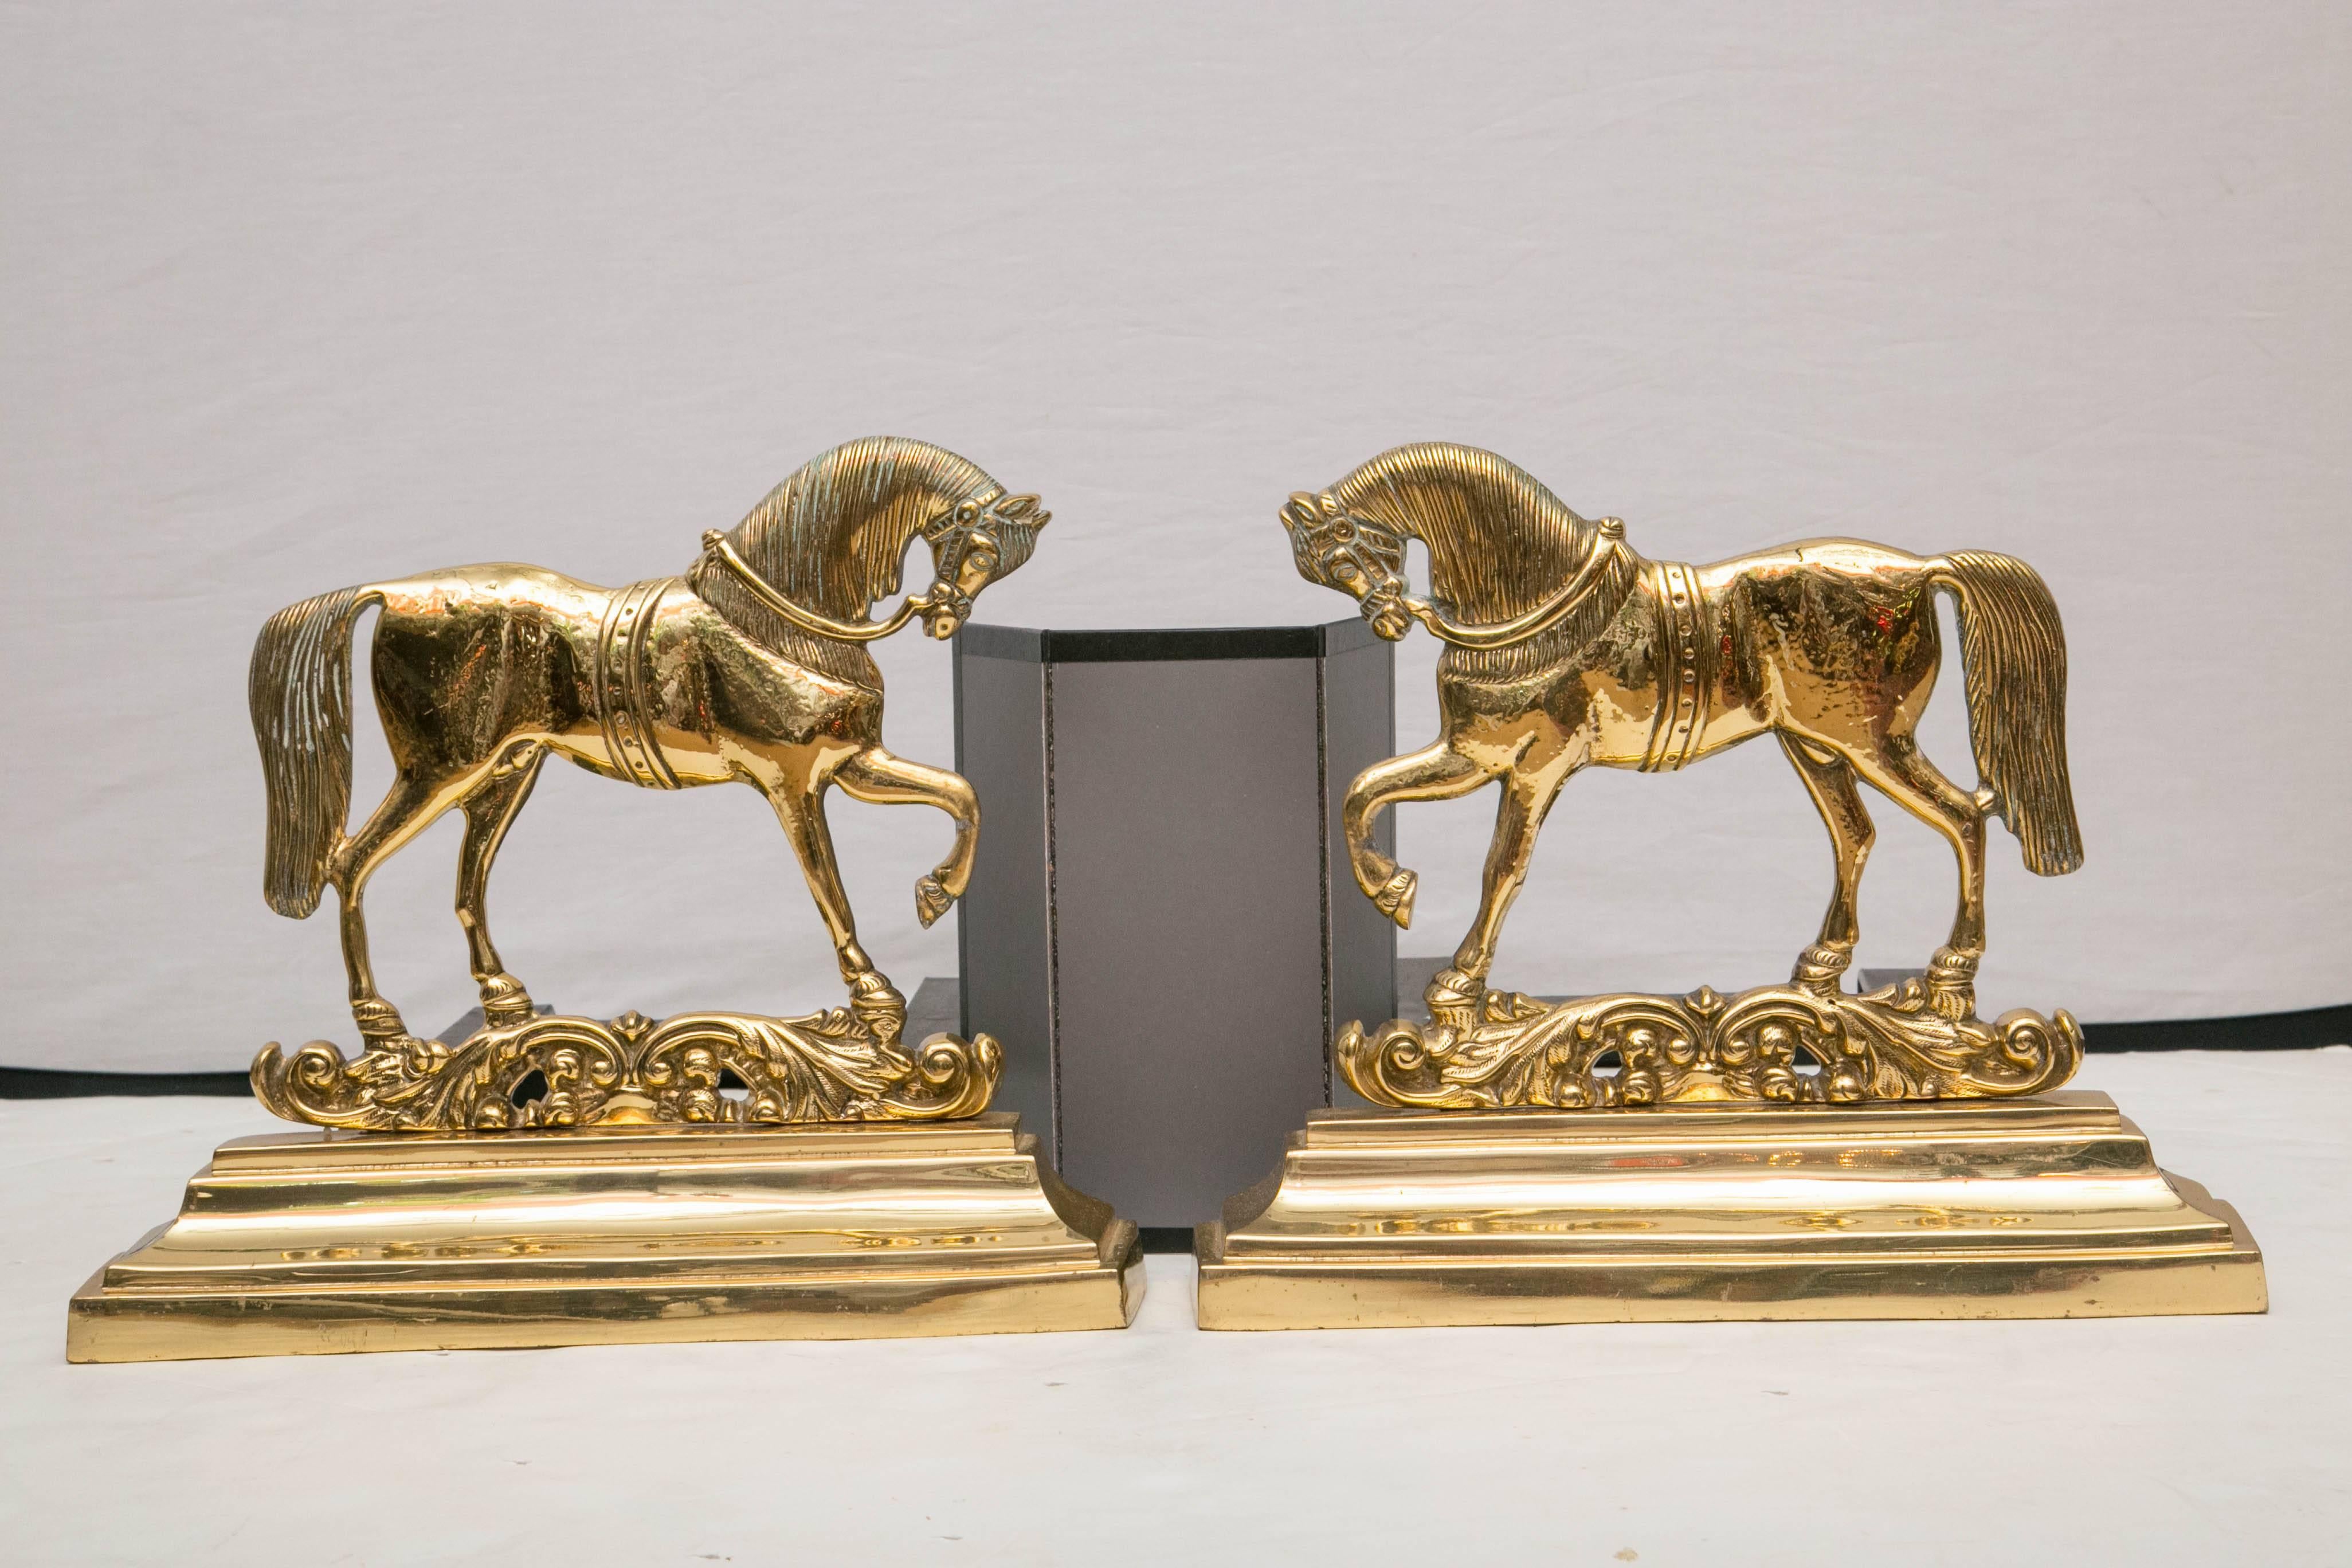 A mirror image pair of brass horse figures on decorative plinth bases, attached to black iron log supports.